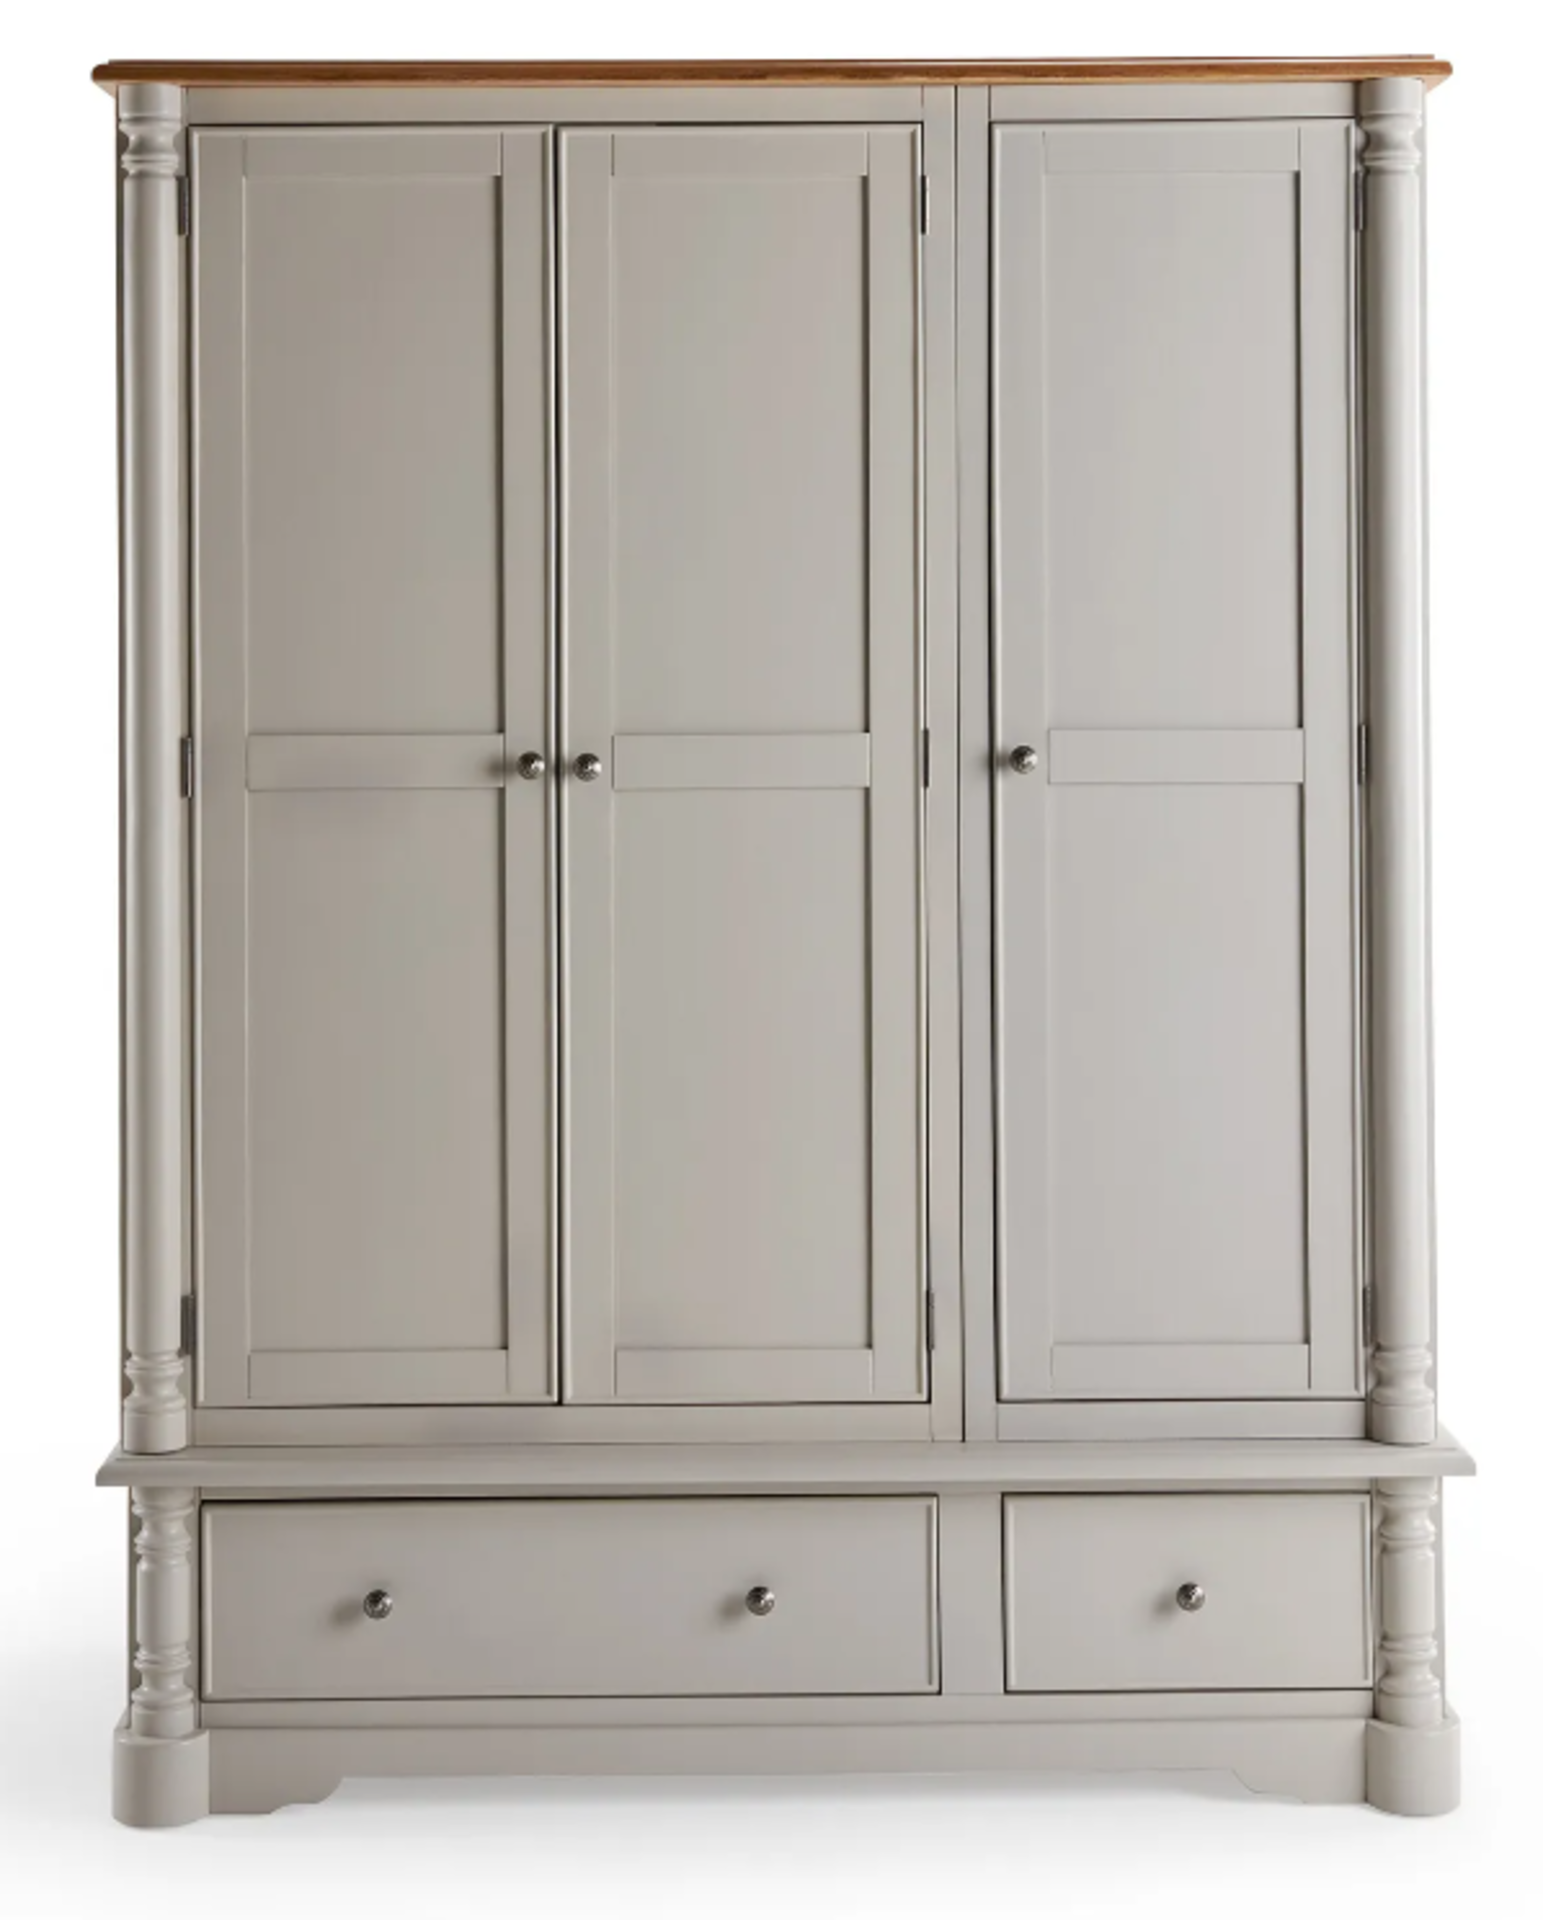 ROMAN Rustic Solid Oak & Painted Triple Wardrobe. RRP £1,299.00. Roman has a welcoming and stately